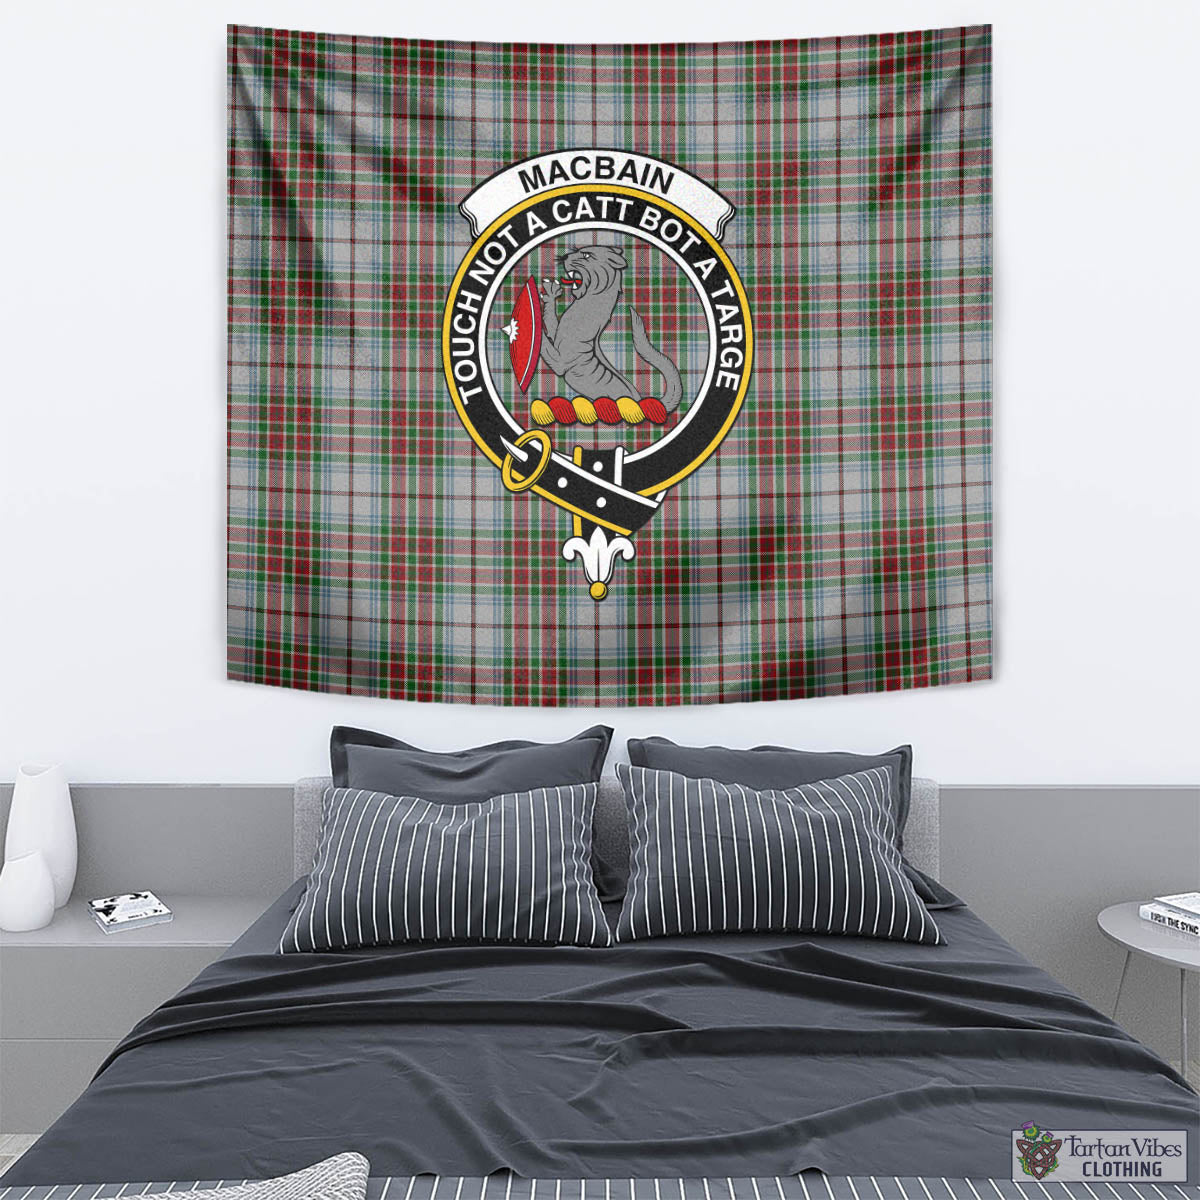 Tartan Vibes Clothing MacBain Dress Tartan Tapestry Wall Hanging and Home Decor for Room with Family Crest